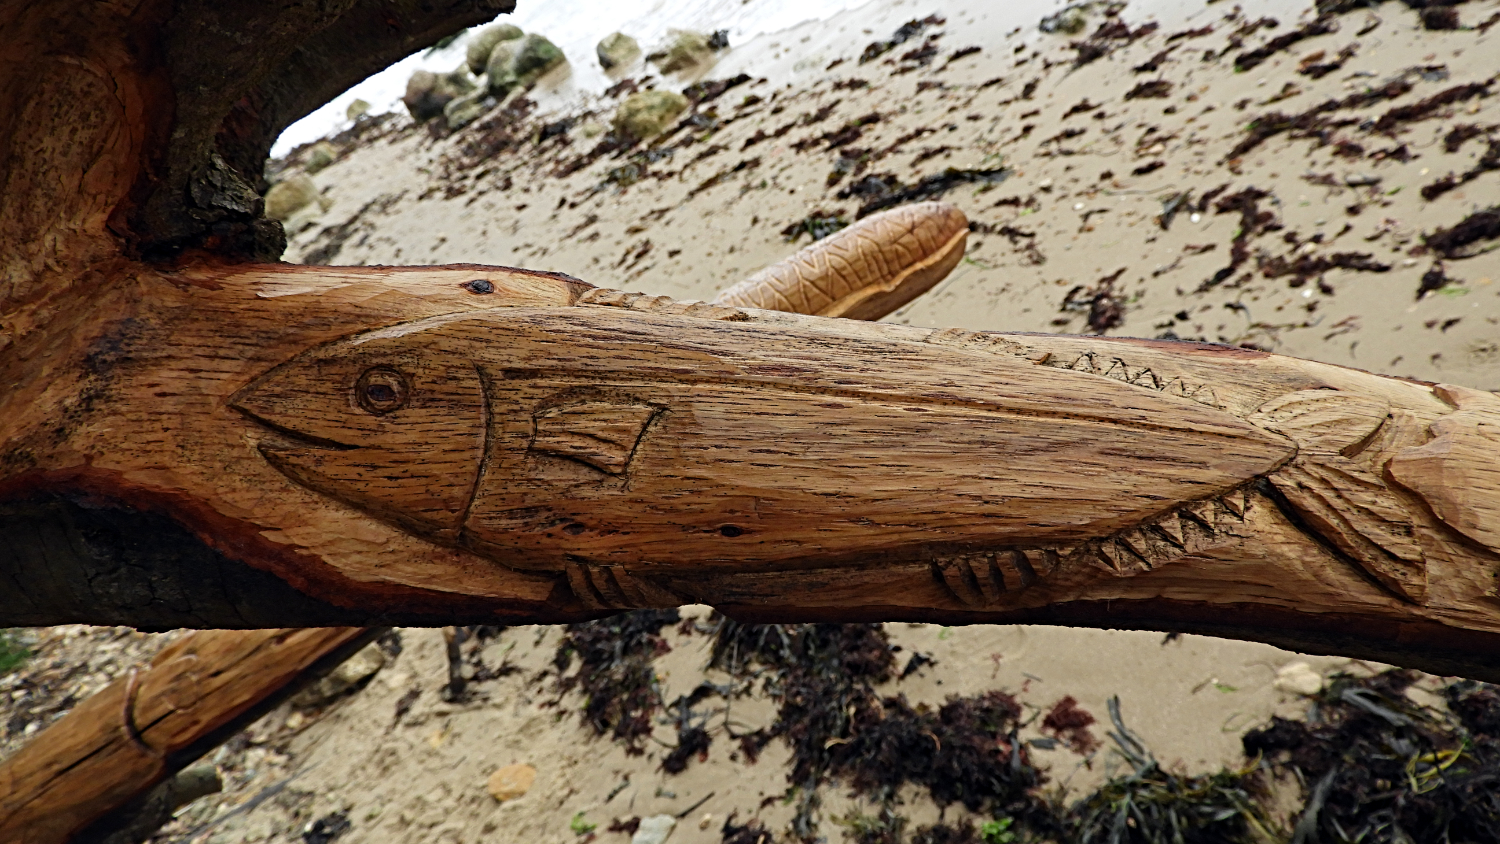 Natural wood carvings, Victoria Fort Country Park, September 2018